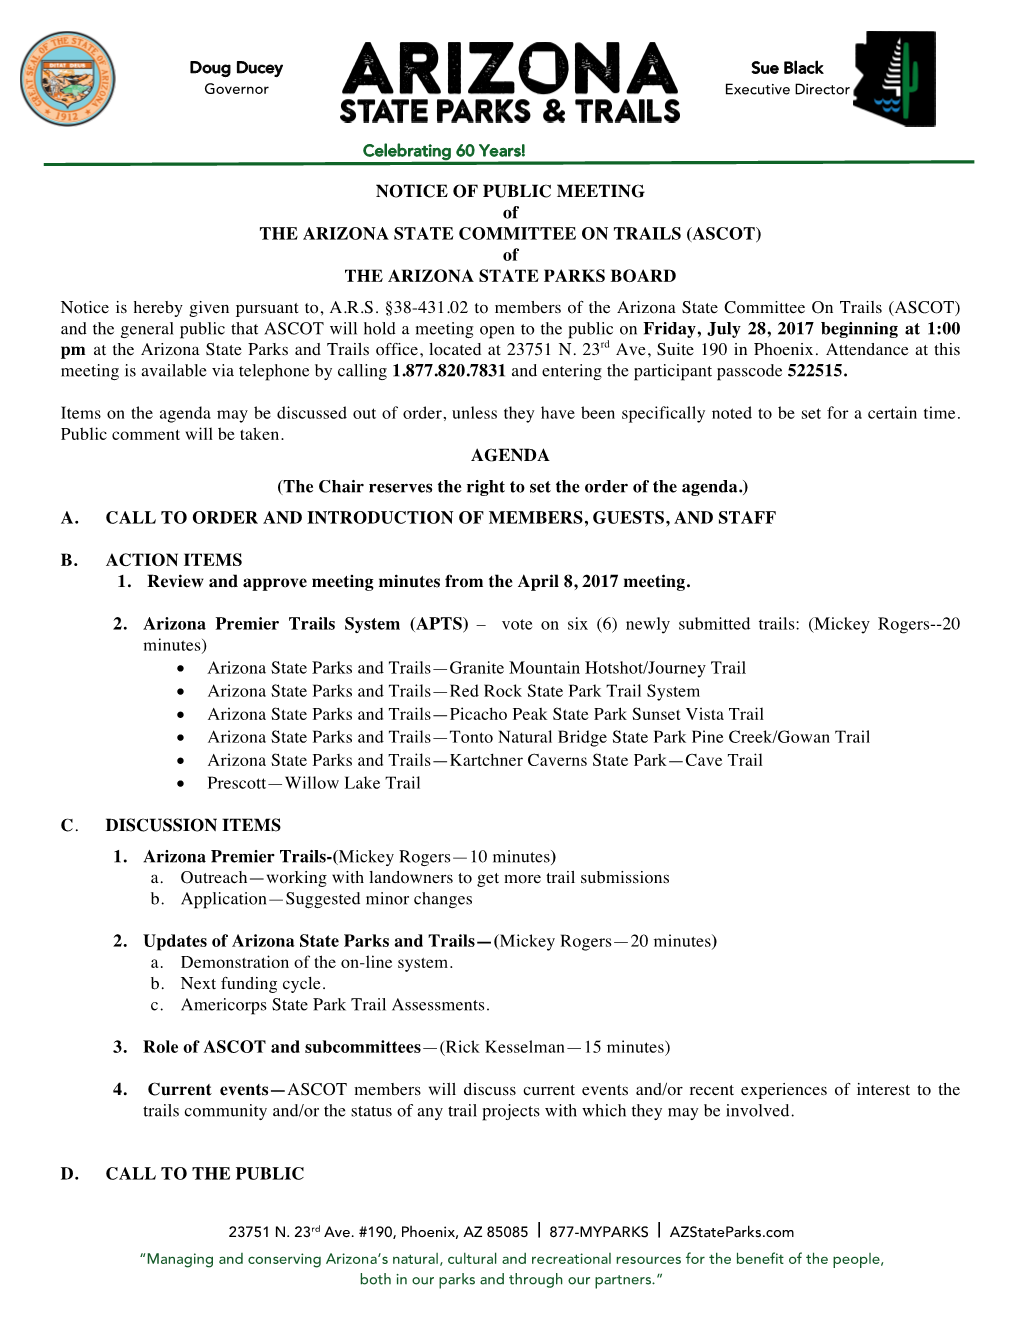 (ASCOT) of the ARIZONA STATE PARKS BOARD Notice Is Hereby Given Pursuant To, A.R.S